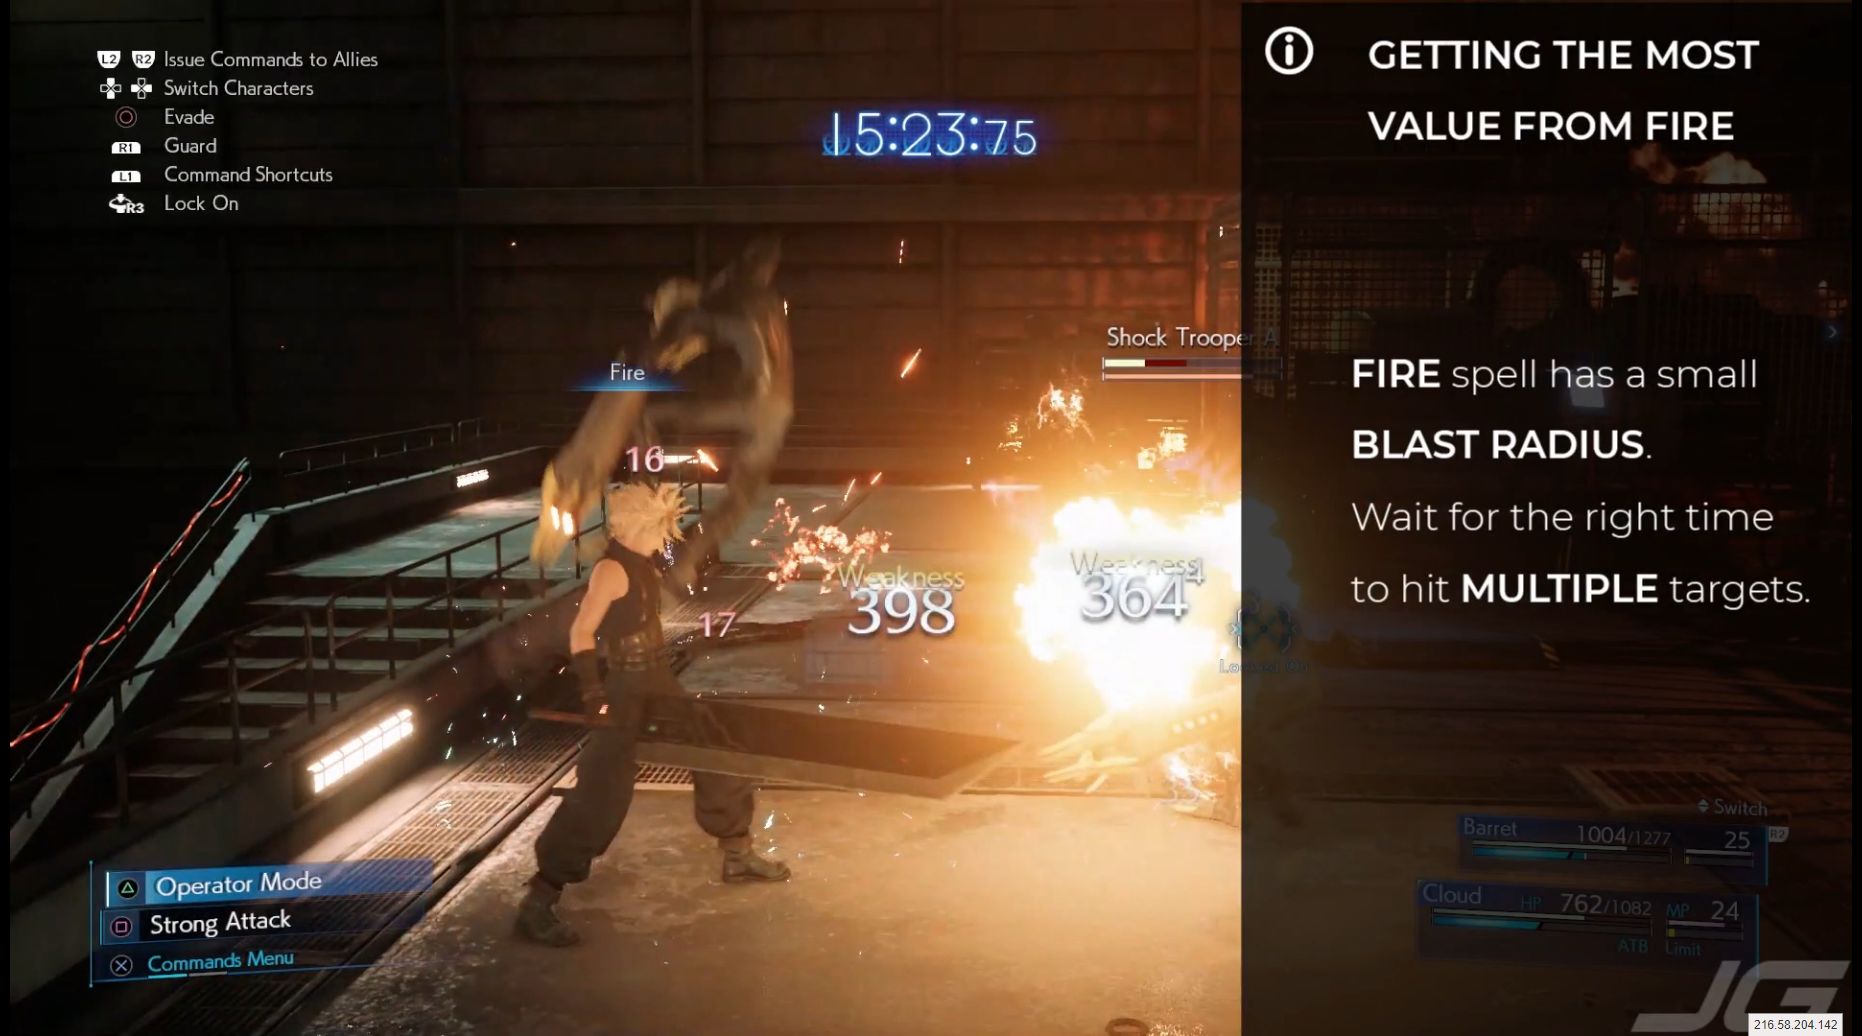 FIRE has a blast radius. You can hit multiple enemies if you wait for the right moment